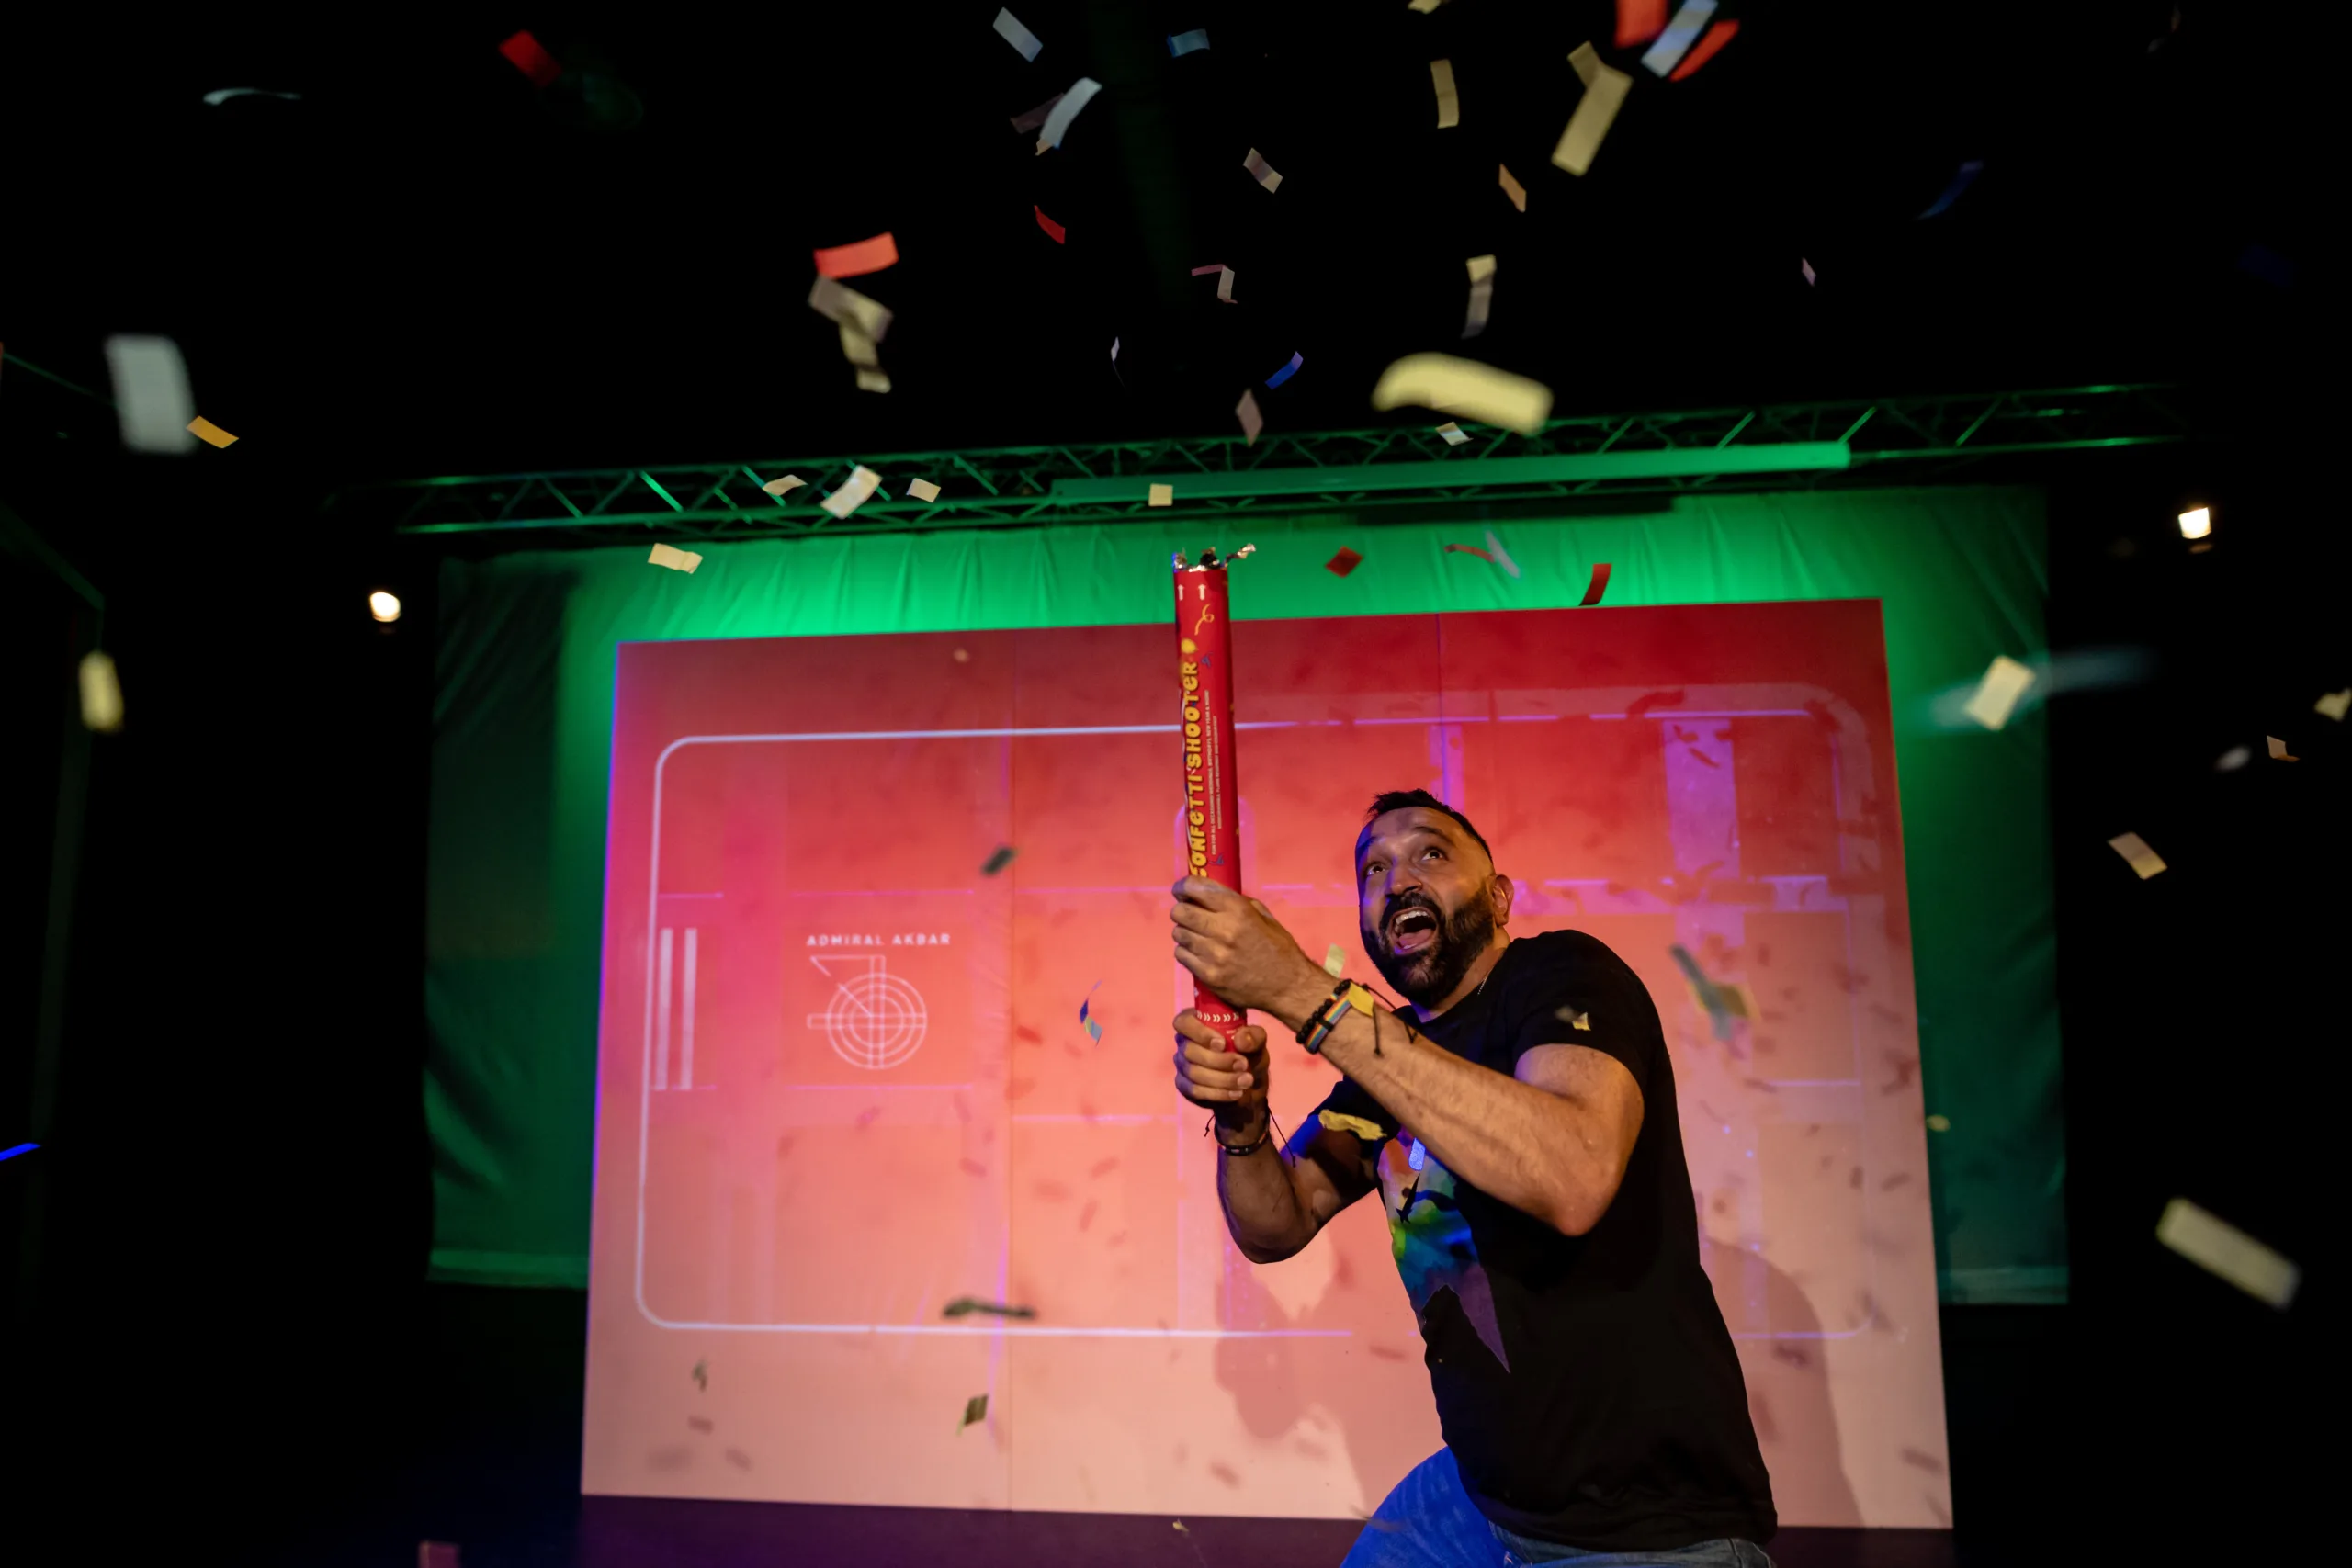 A brown man in a black t-shirt and with a neatly trimmed black beard lets off a confetti cannon on stage.